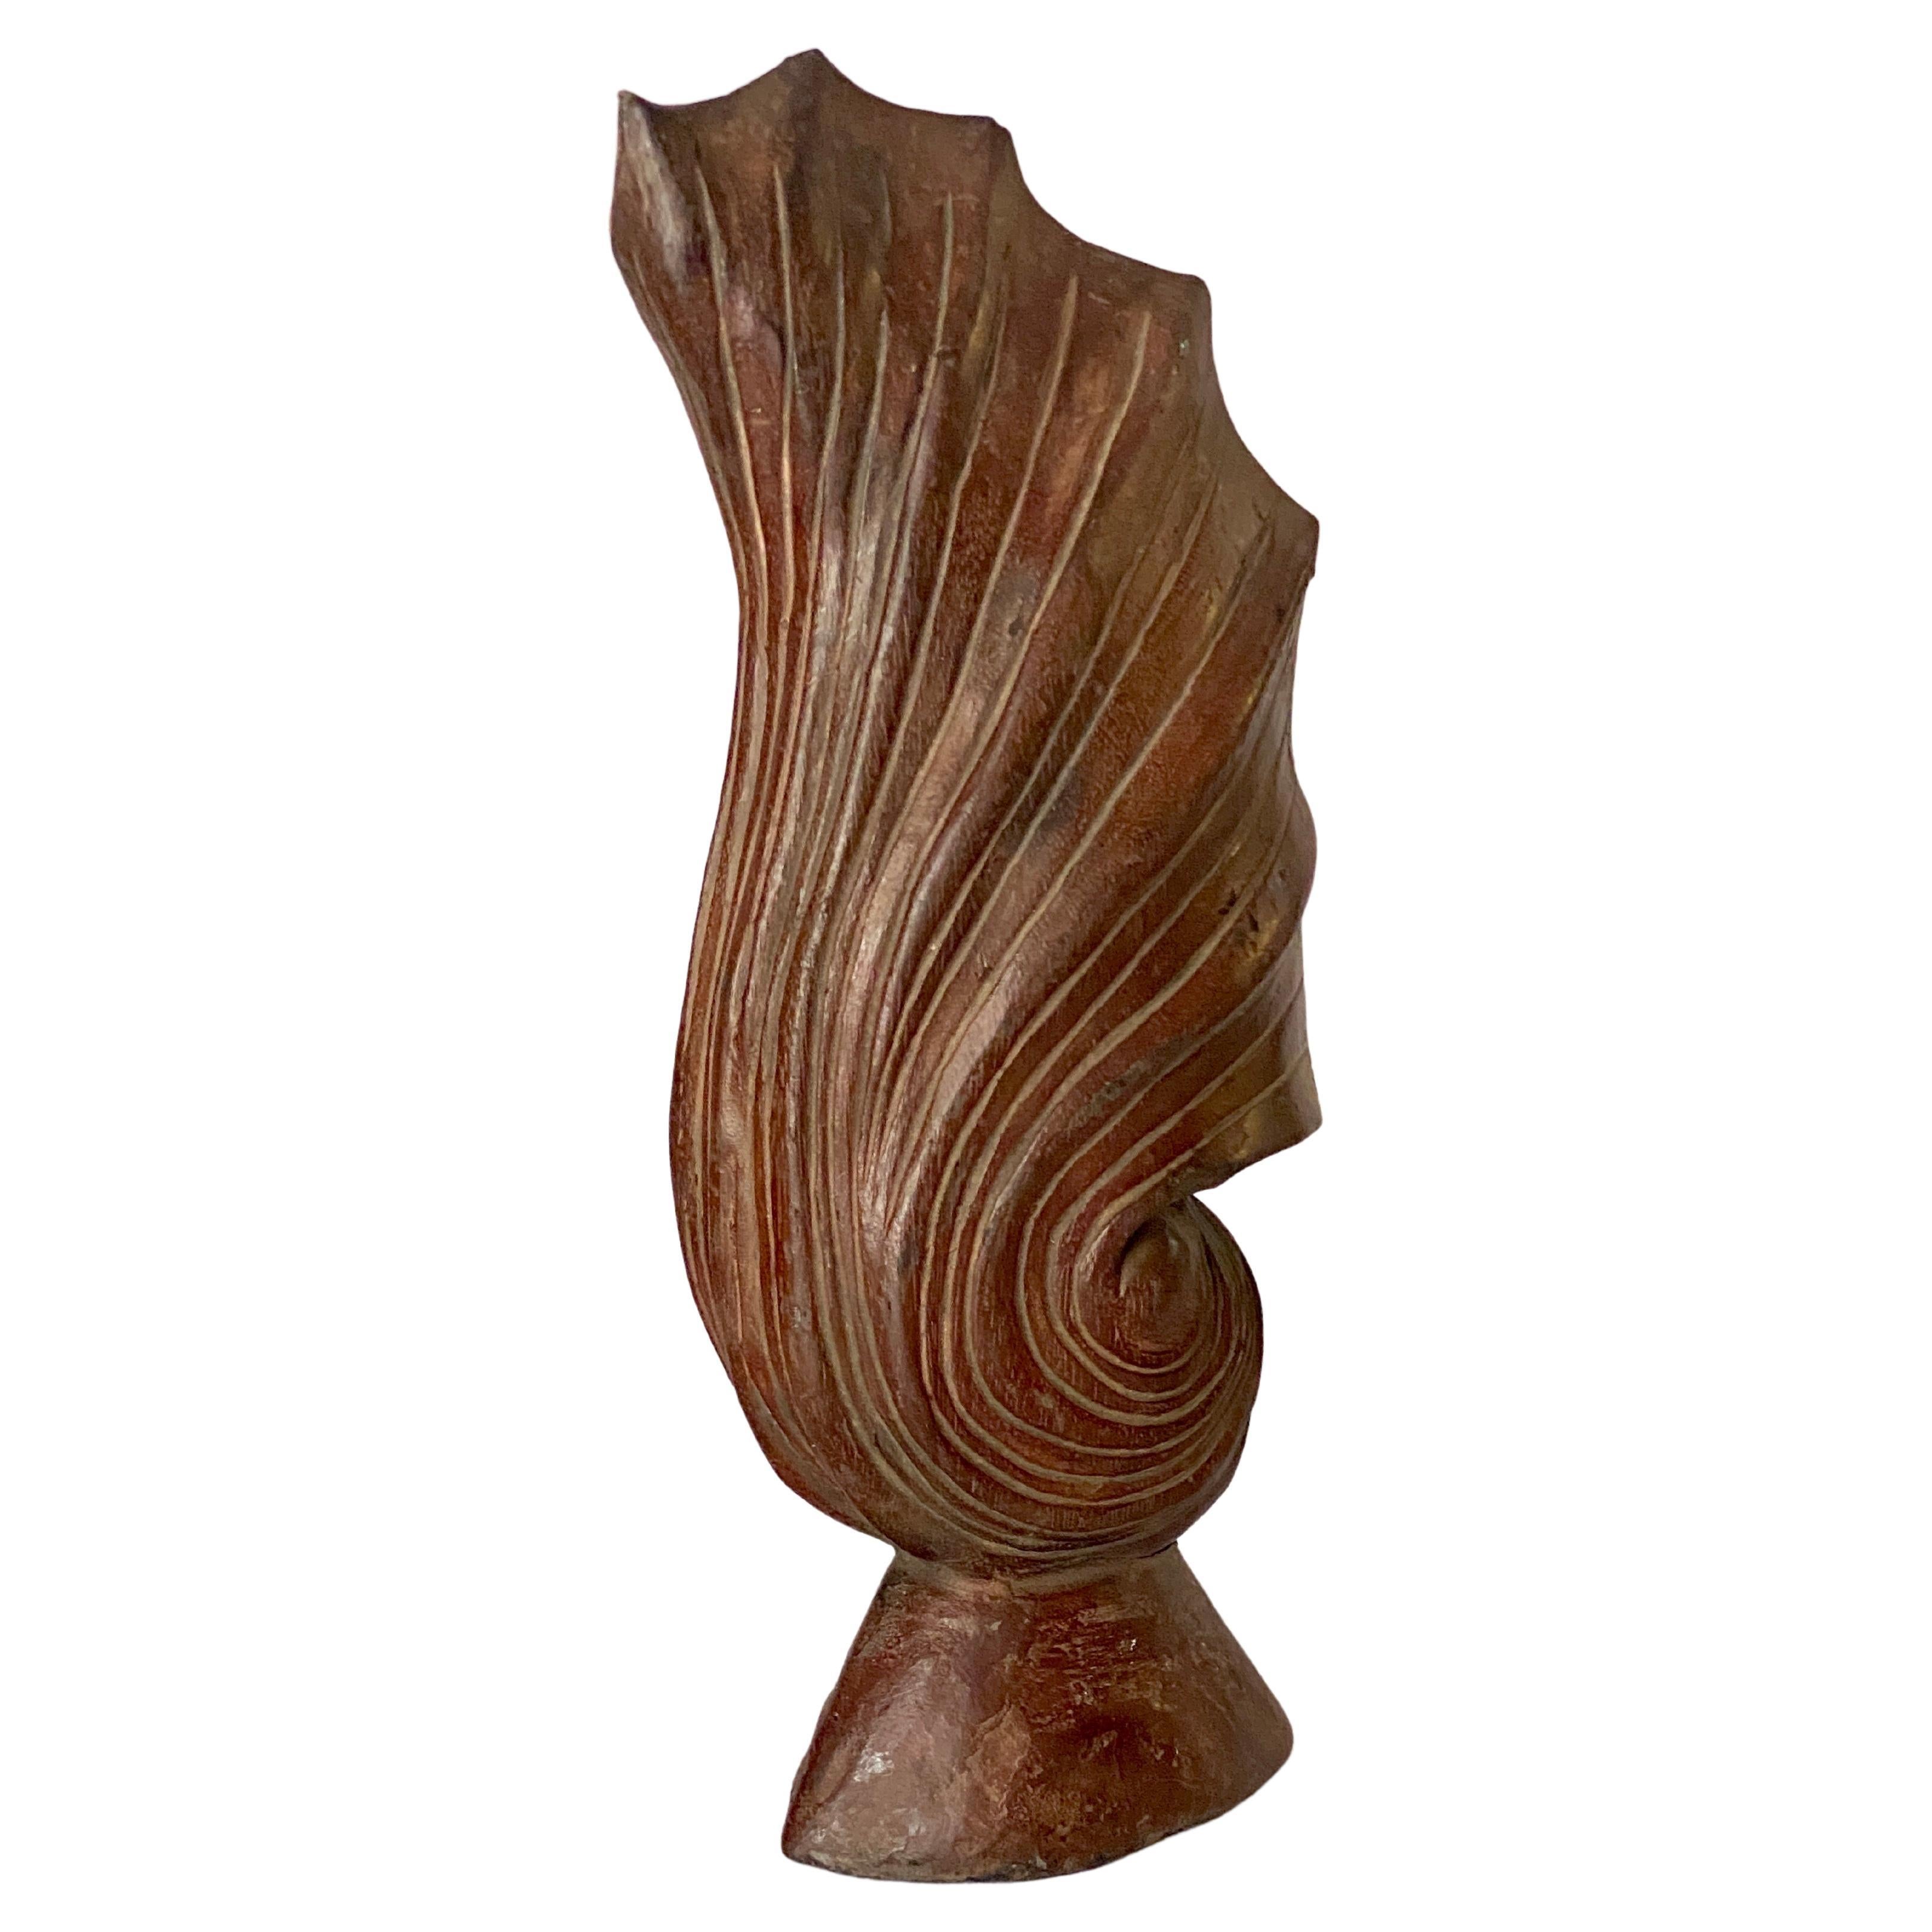 Wood Abstract Sculpture, Shell Shape, Brown Color, France, 1960